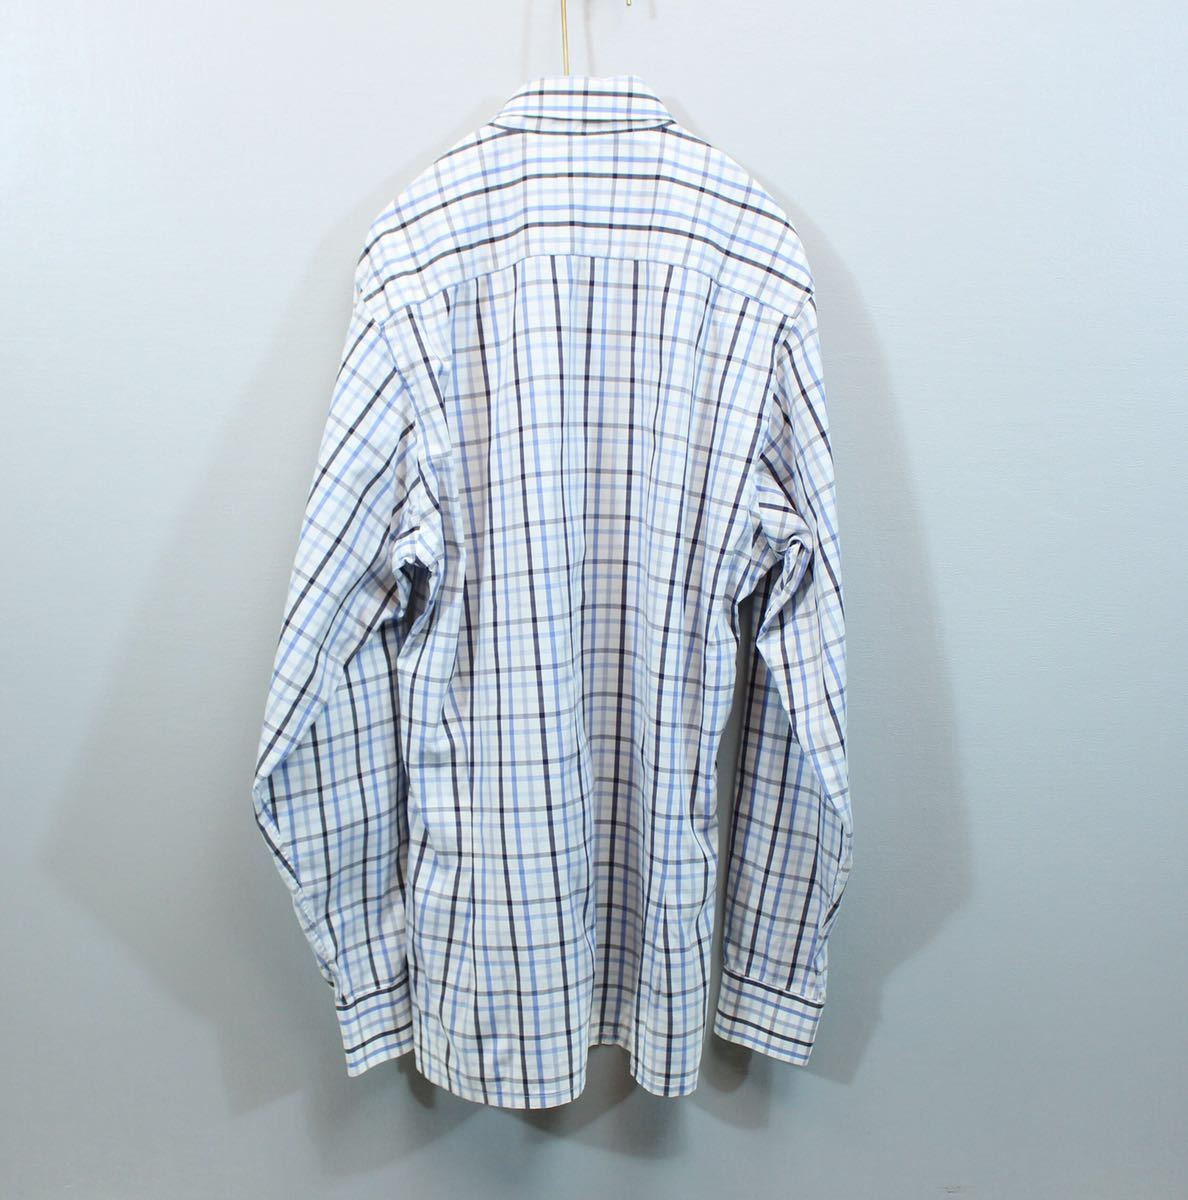 HERMES SERIE BUTTON CHECK PATTERNED LONG SLEEVE SHIRT MADE IN FRANCE/エルメスセリエボタンチェック柄長袖シャツ_画像5